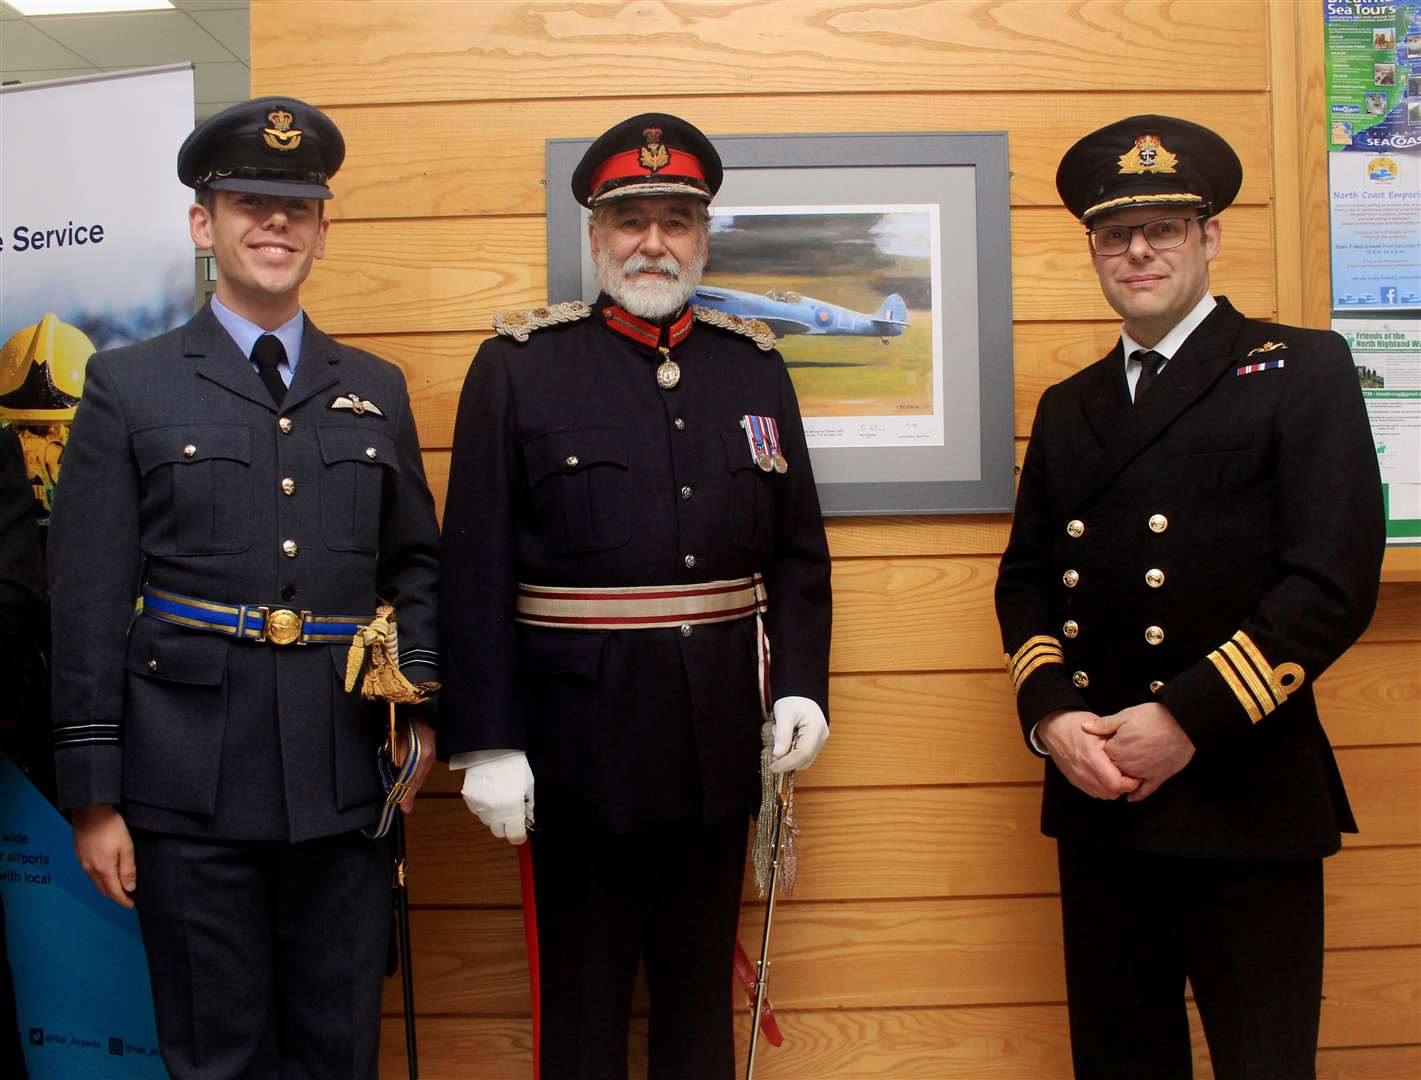 From left: Flight Lieutenant Calum Falconer, of 6 Squadron at RAF Lossiemouth, Lord Thurso, Lord-Lieutenant of Caithness, and Commander Ian Walker, of Vulcan, the Royal Navy representative, beside the newly unveiled Spitfire AA810 limited-edition print in the airport terminal at Wick. Picture: Alan Hendry